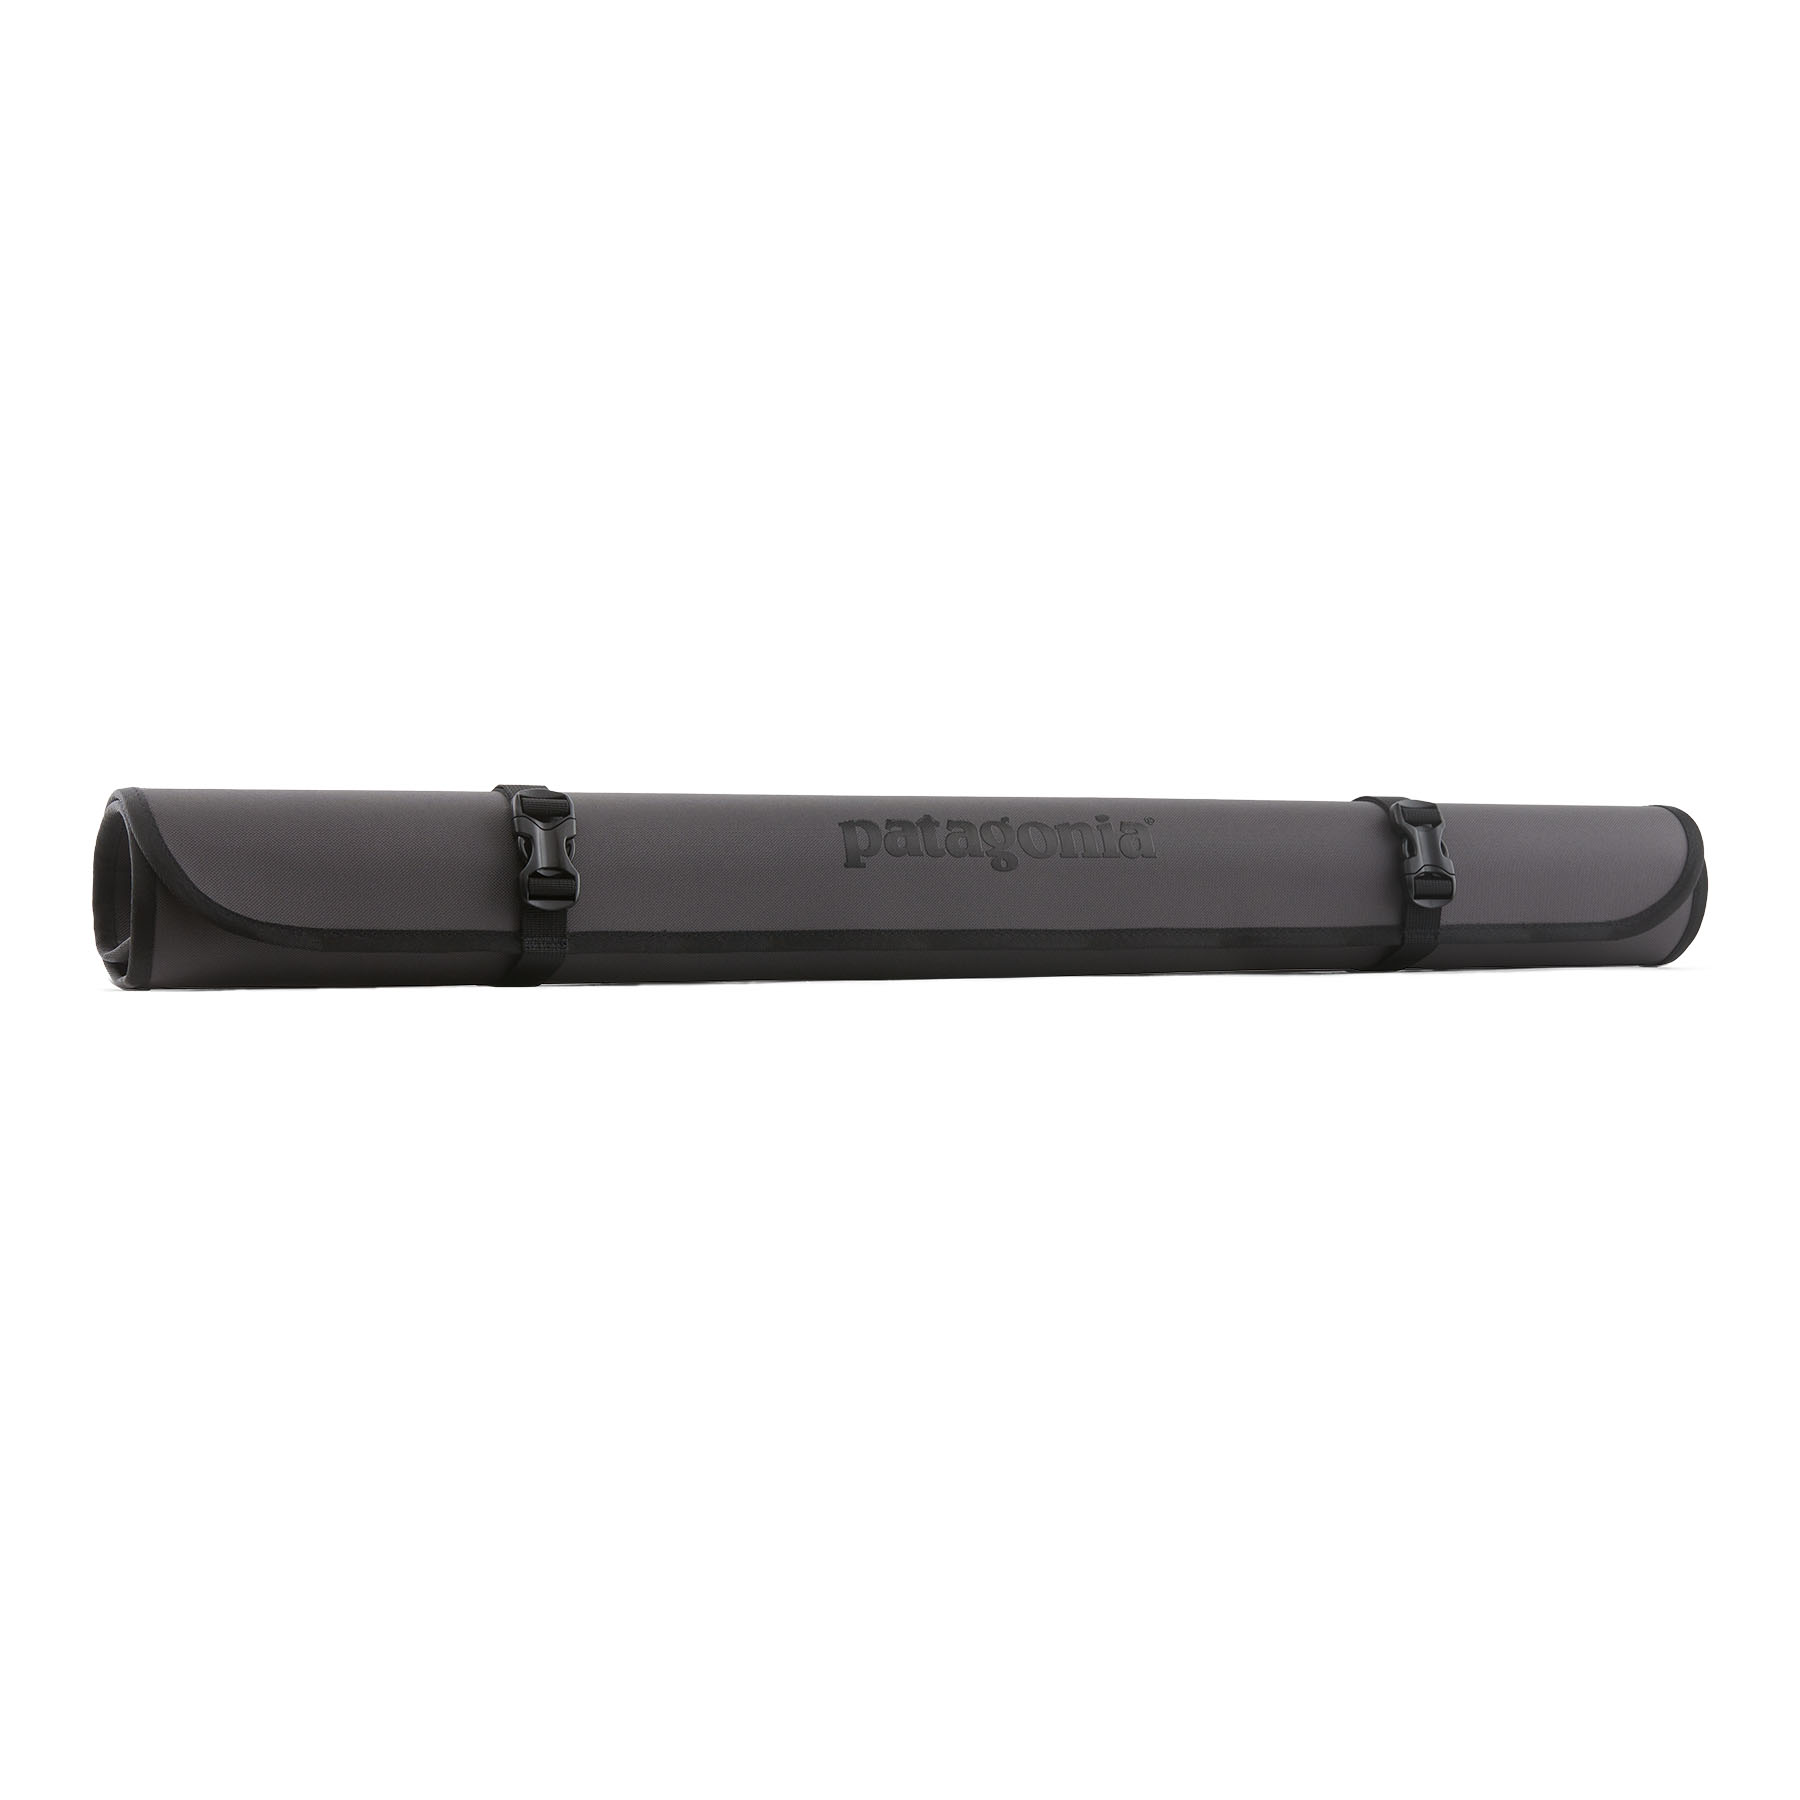 Travel Rod Roll small (forge grey)